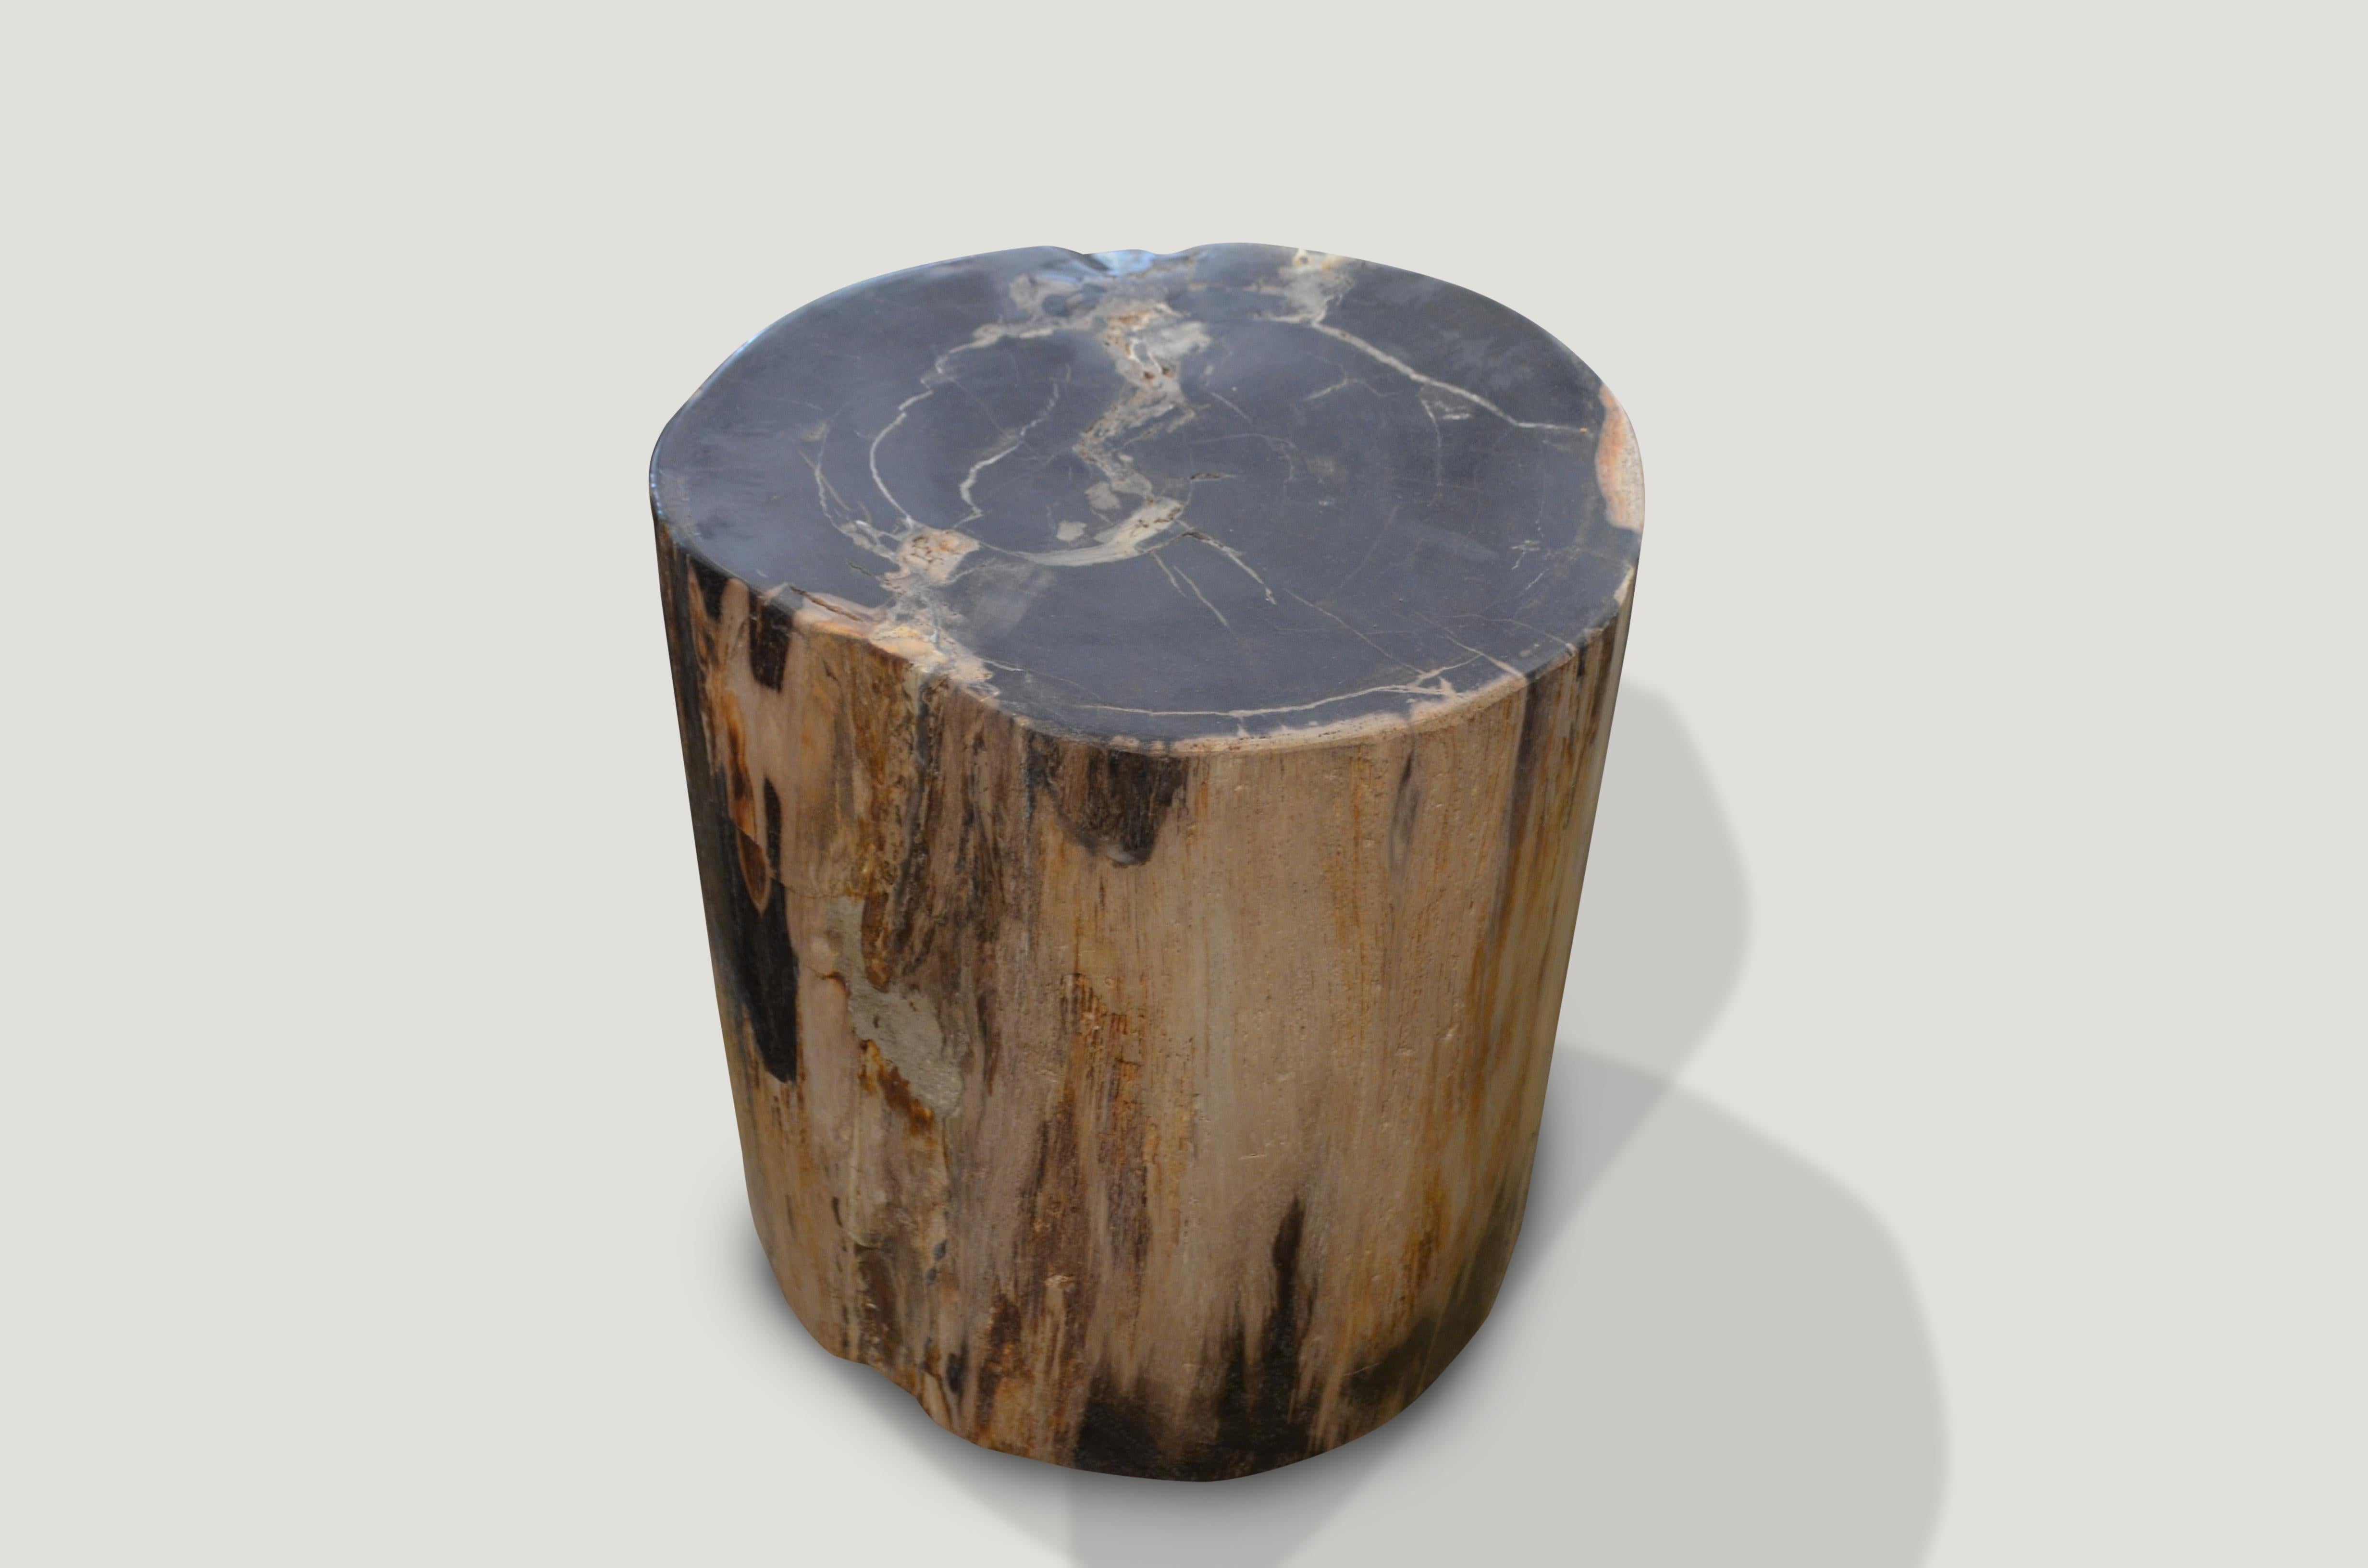 Striking contrasting color tones on this petrified wood side table.

We source the highest quality petrified wood available. Each piece is hand-selected and highly polished with minimal cracks. Petrified wood is extremely versatile – even great